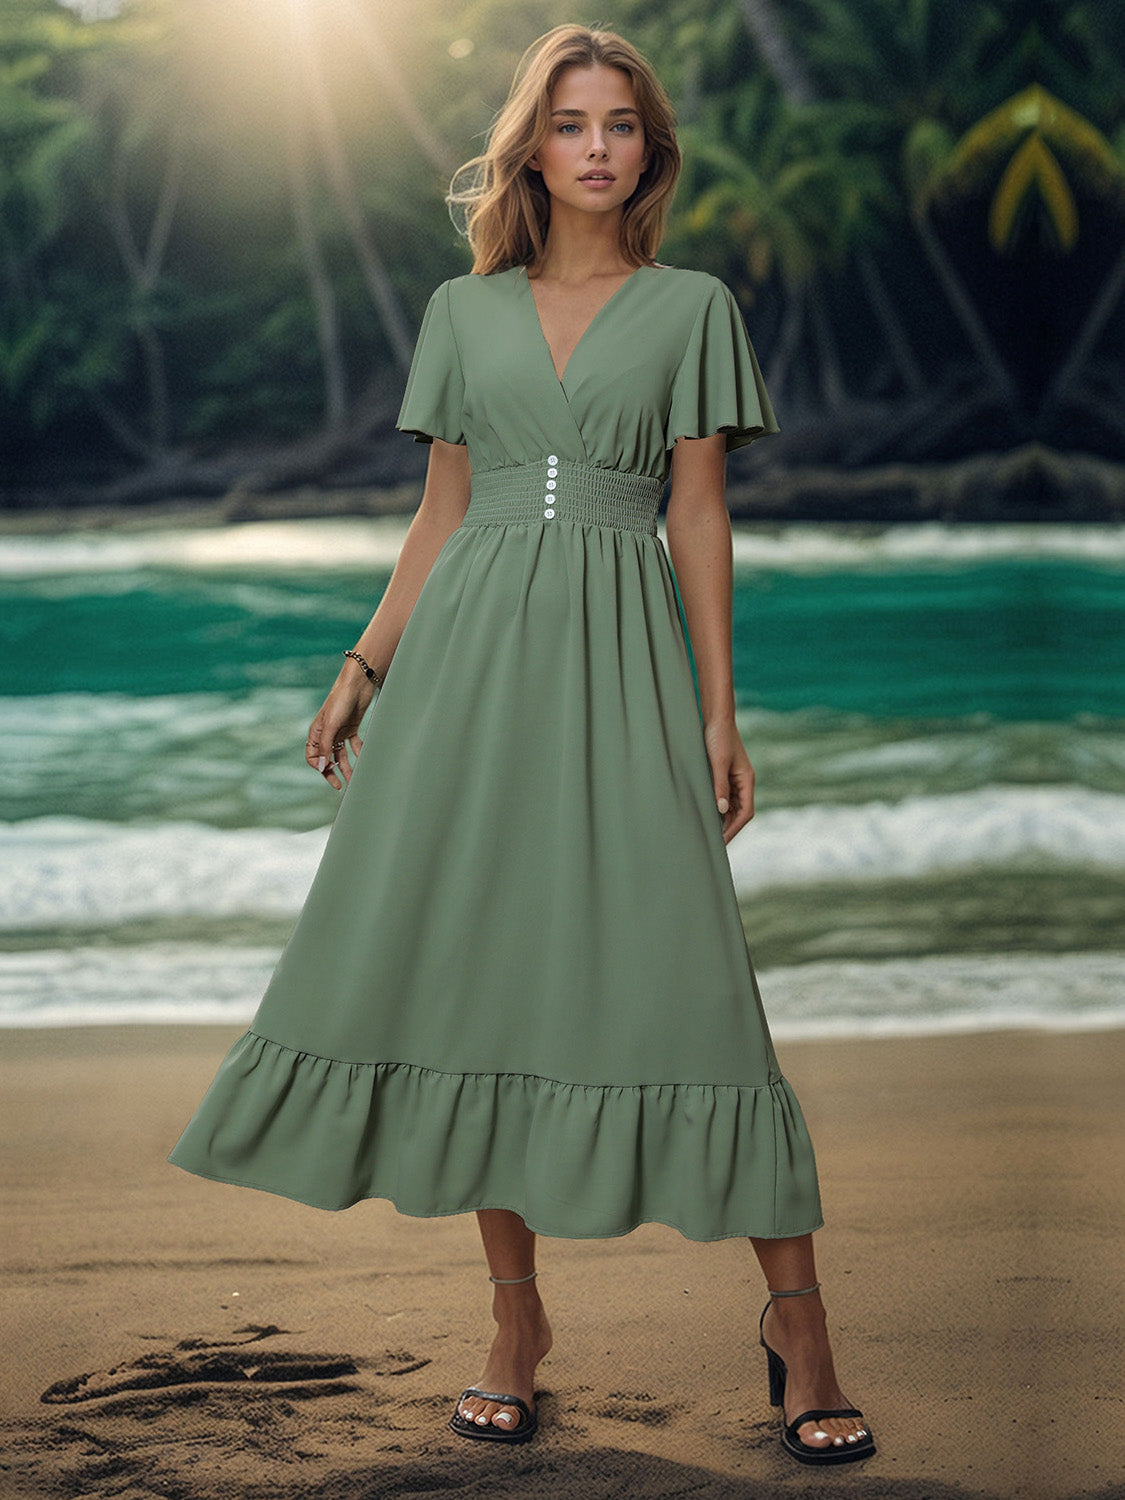 Elegant Summer Beach Wedding Guest Dresses for Women Over 50: Surplice Flutter Sleeve Midi Dress - Perfect Party Attire for Mature Ladies, Ideal for Older Guests Seeking Style and Comfort!